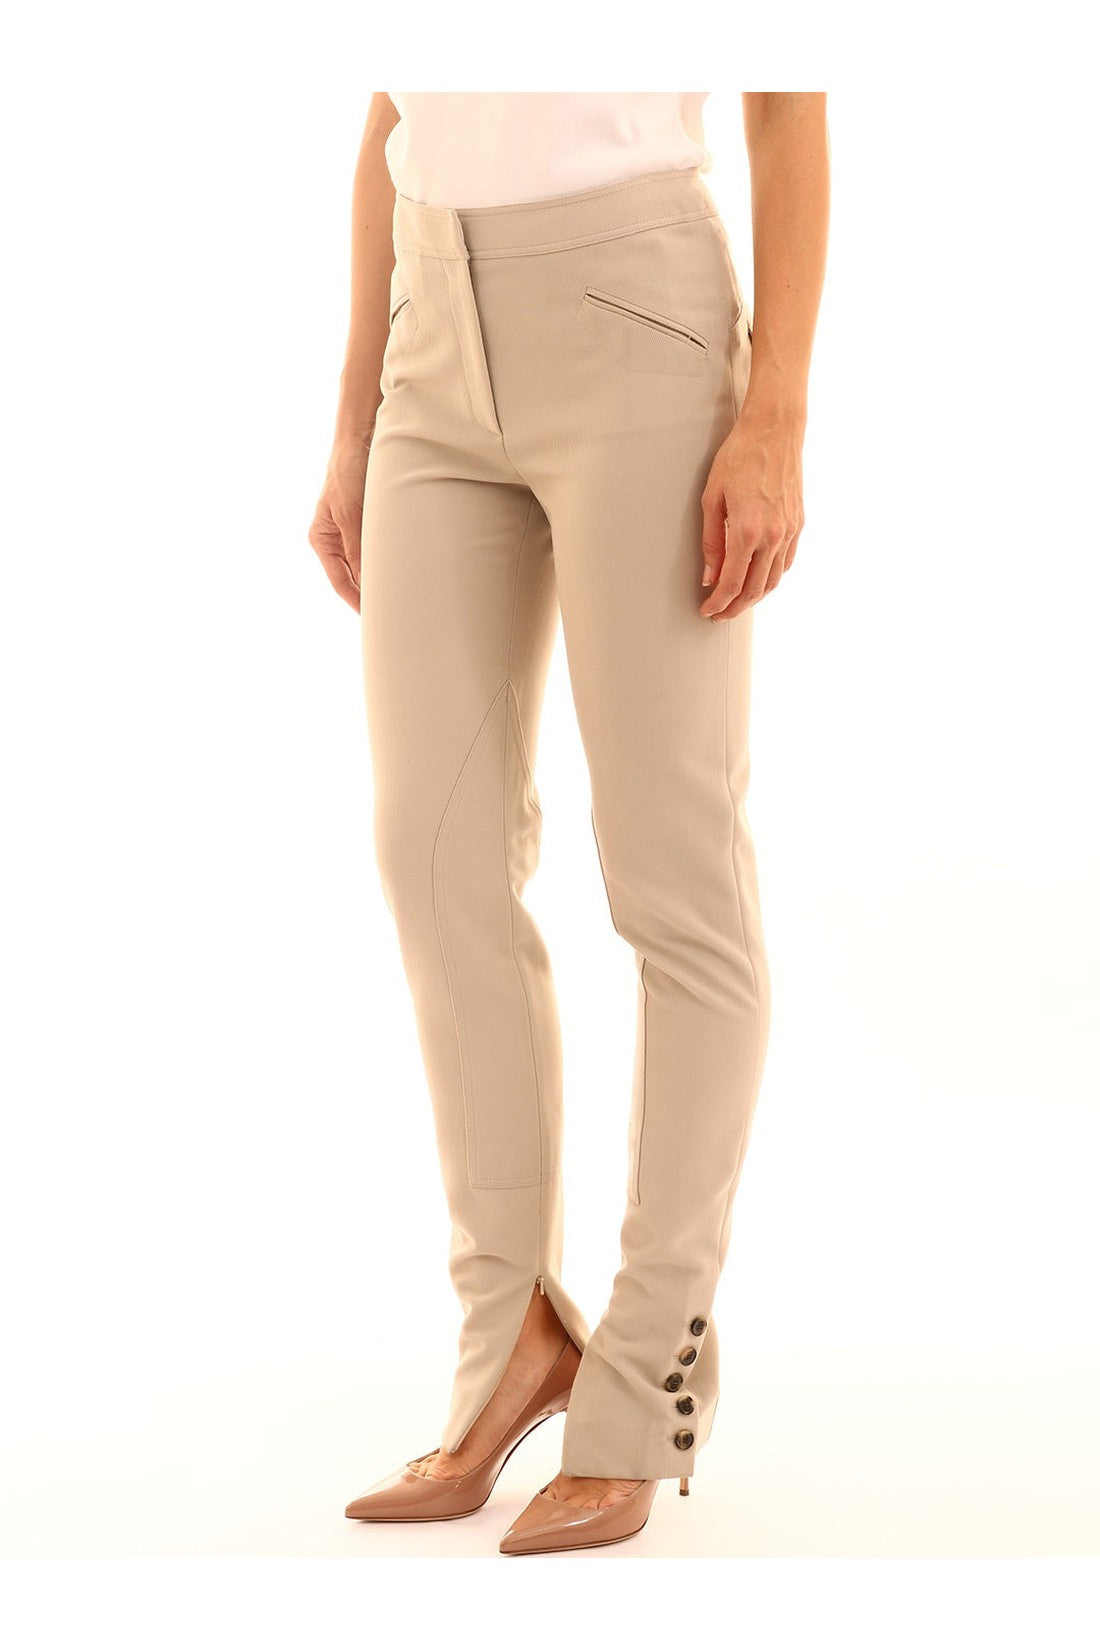 Beige trousers with Botton